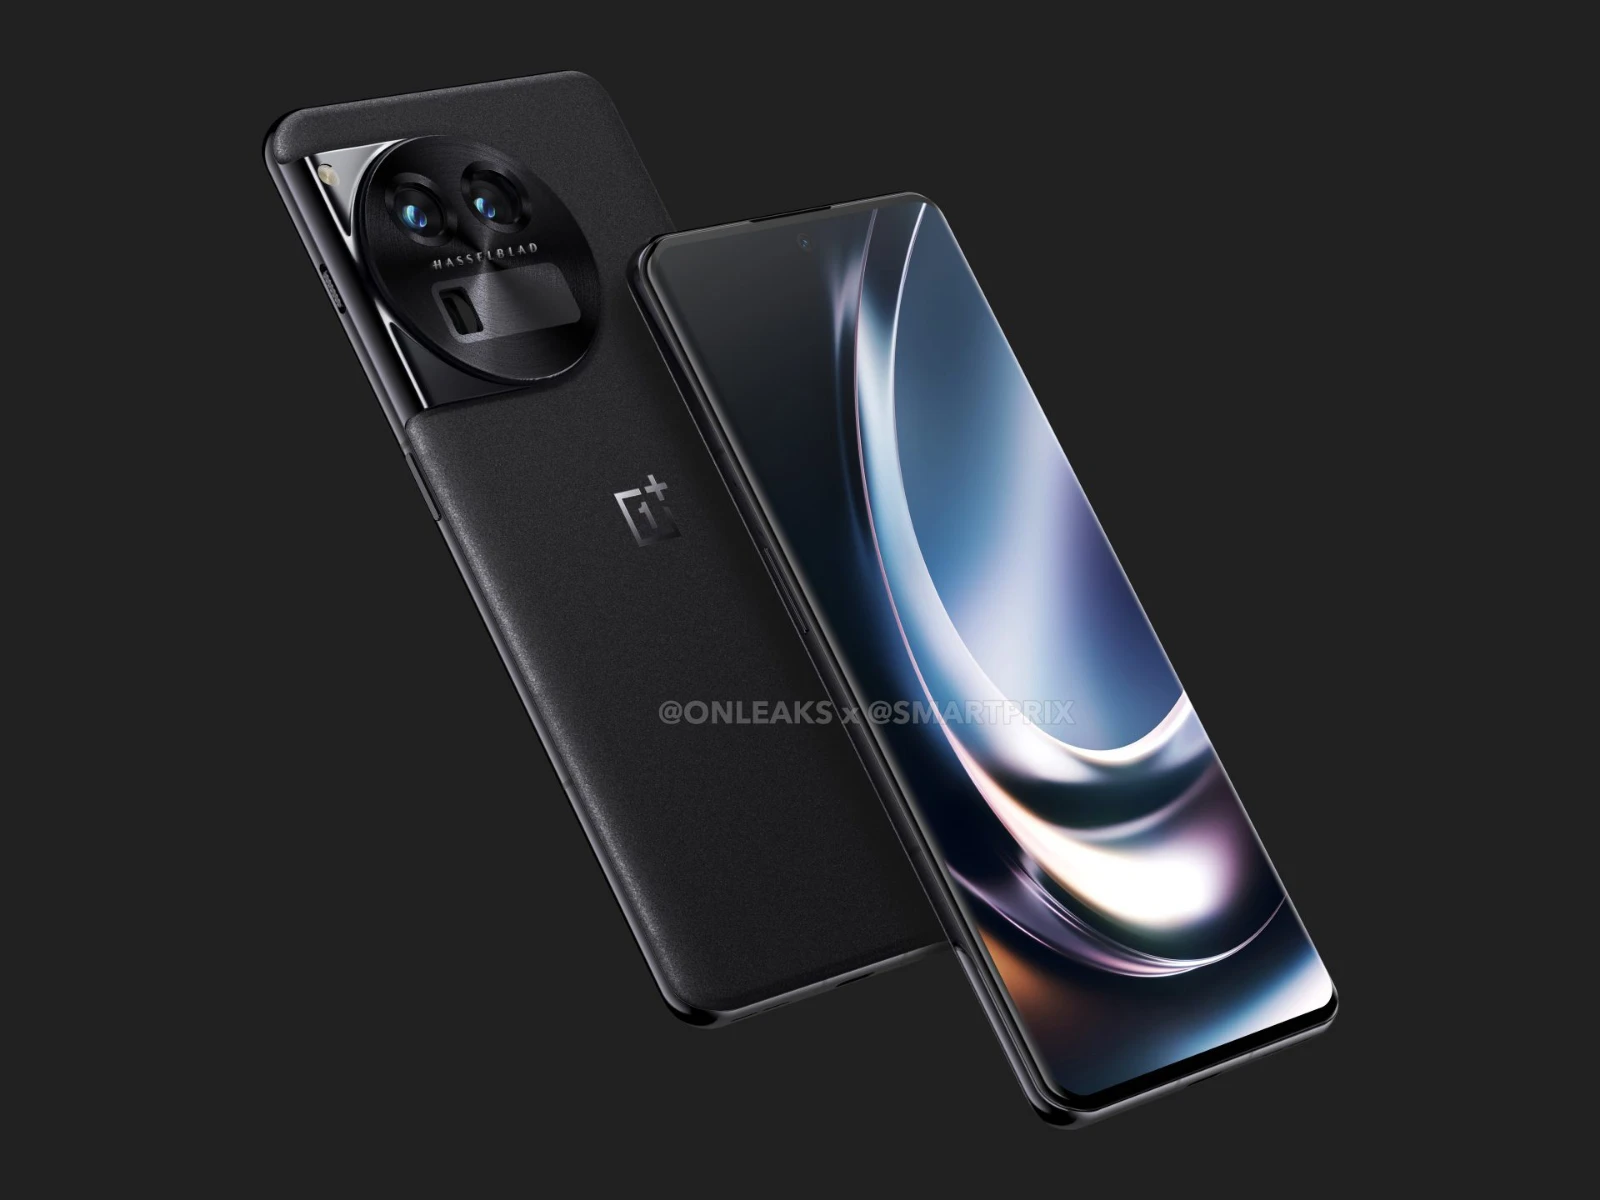 OnePlus 12 Image, A render of the OnePlus 12, showing its sleek design and periscopic camera setup